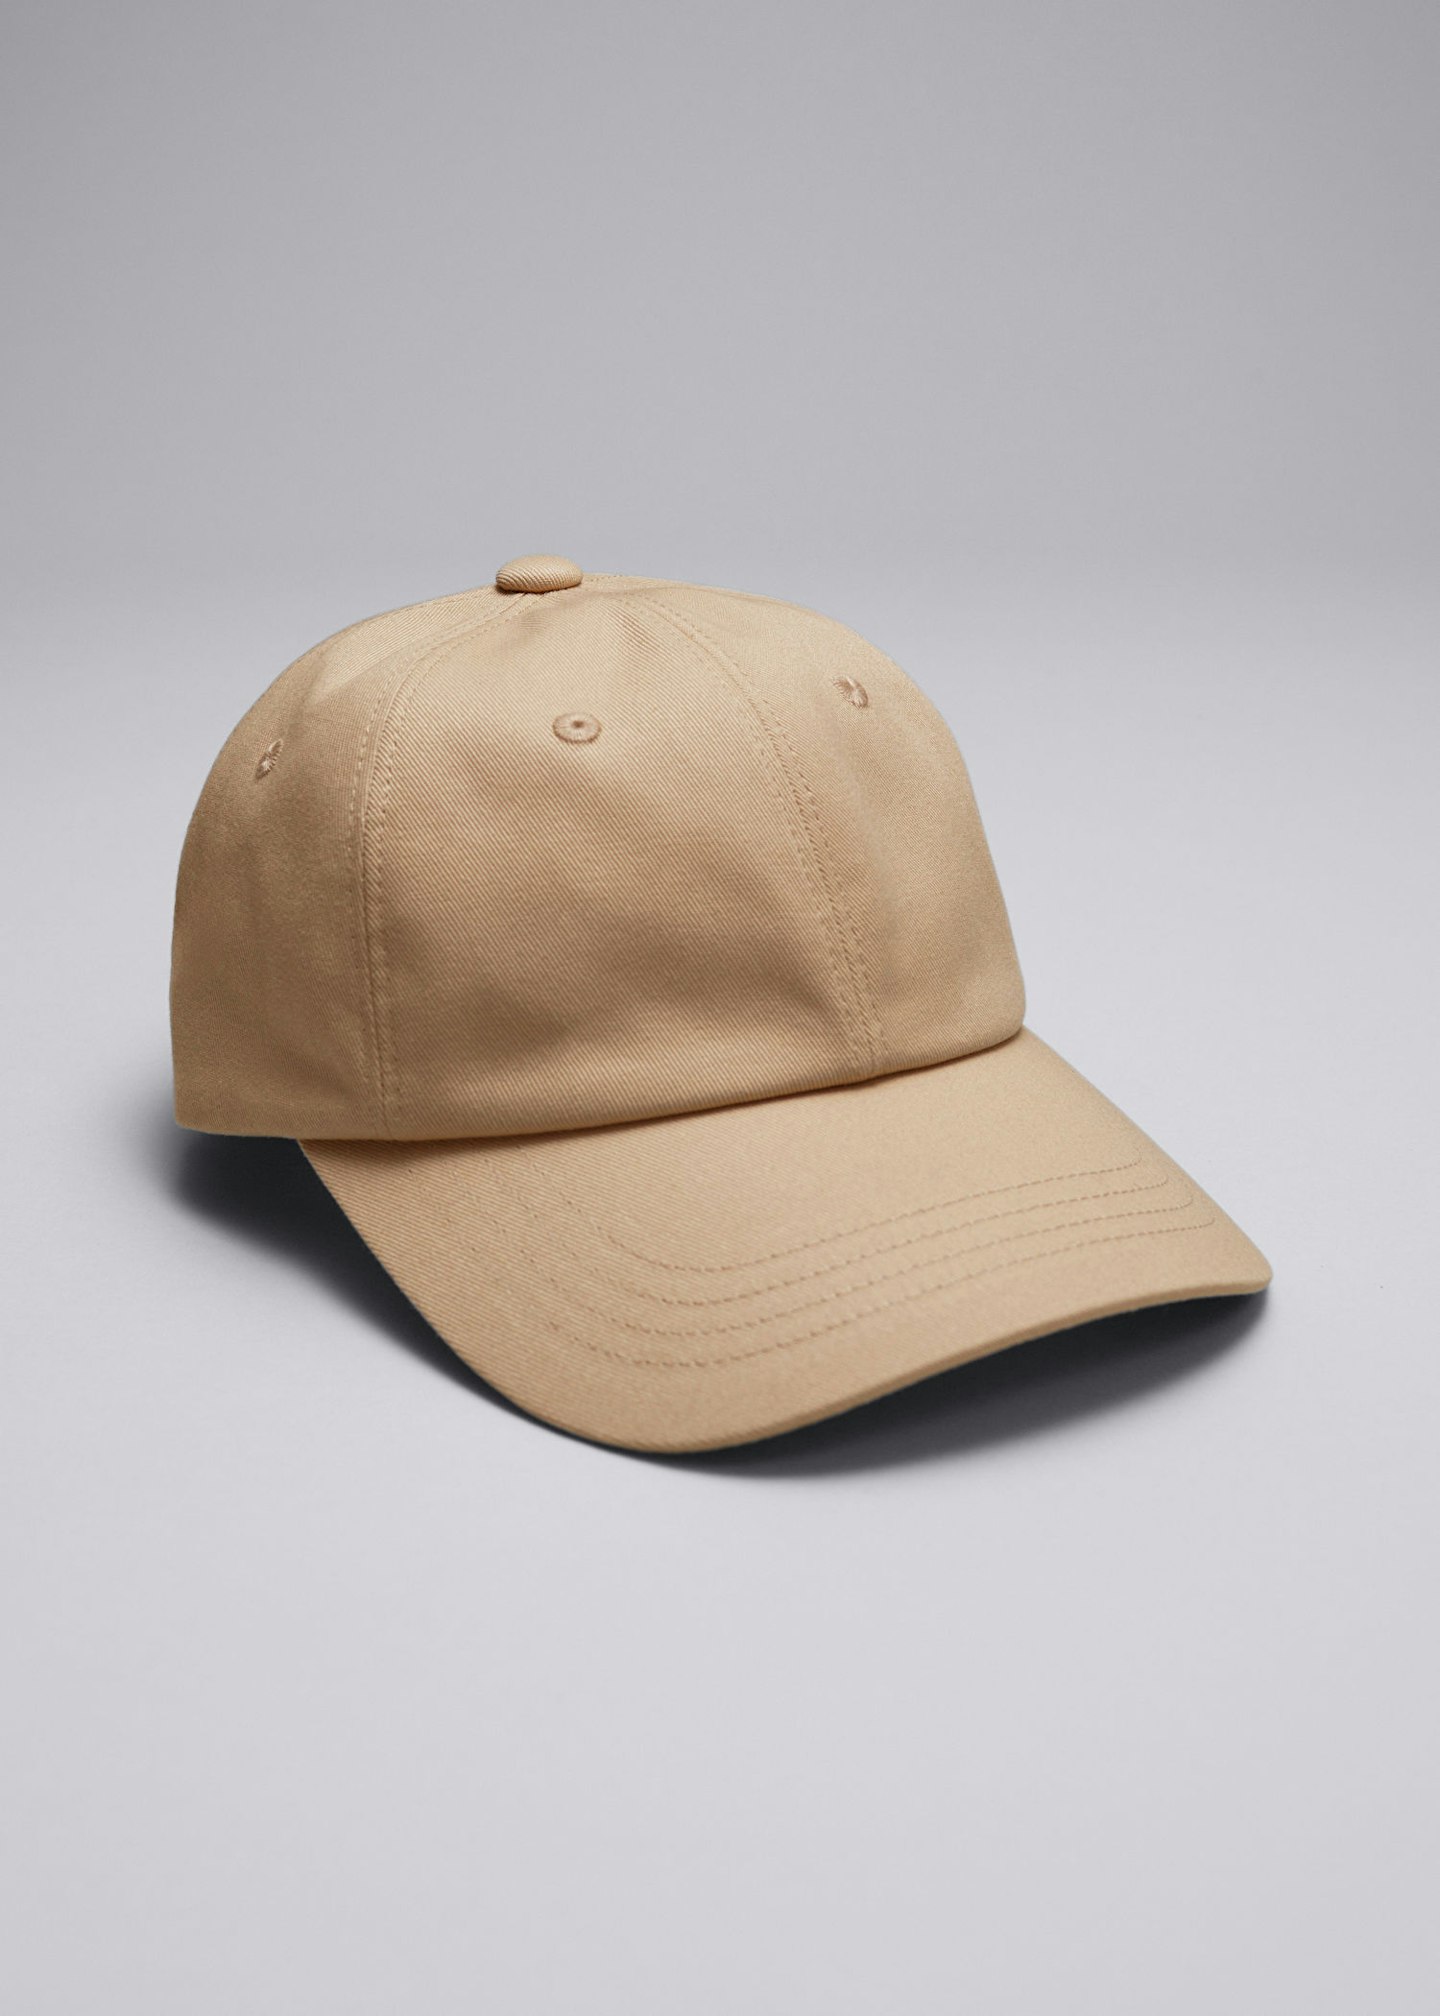 & other stories cap 